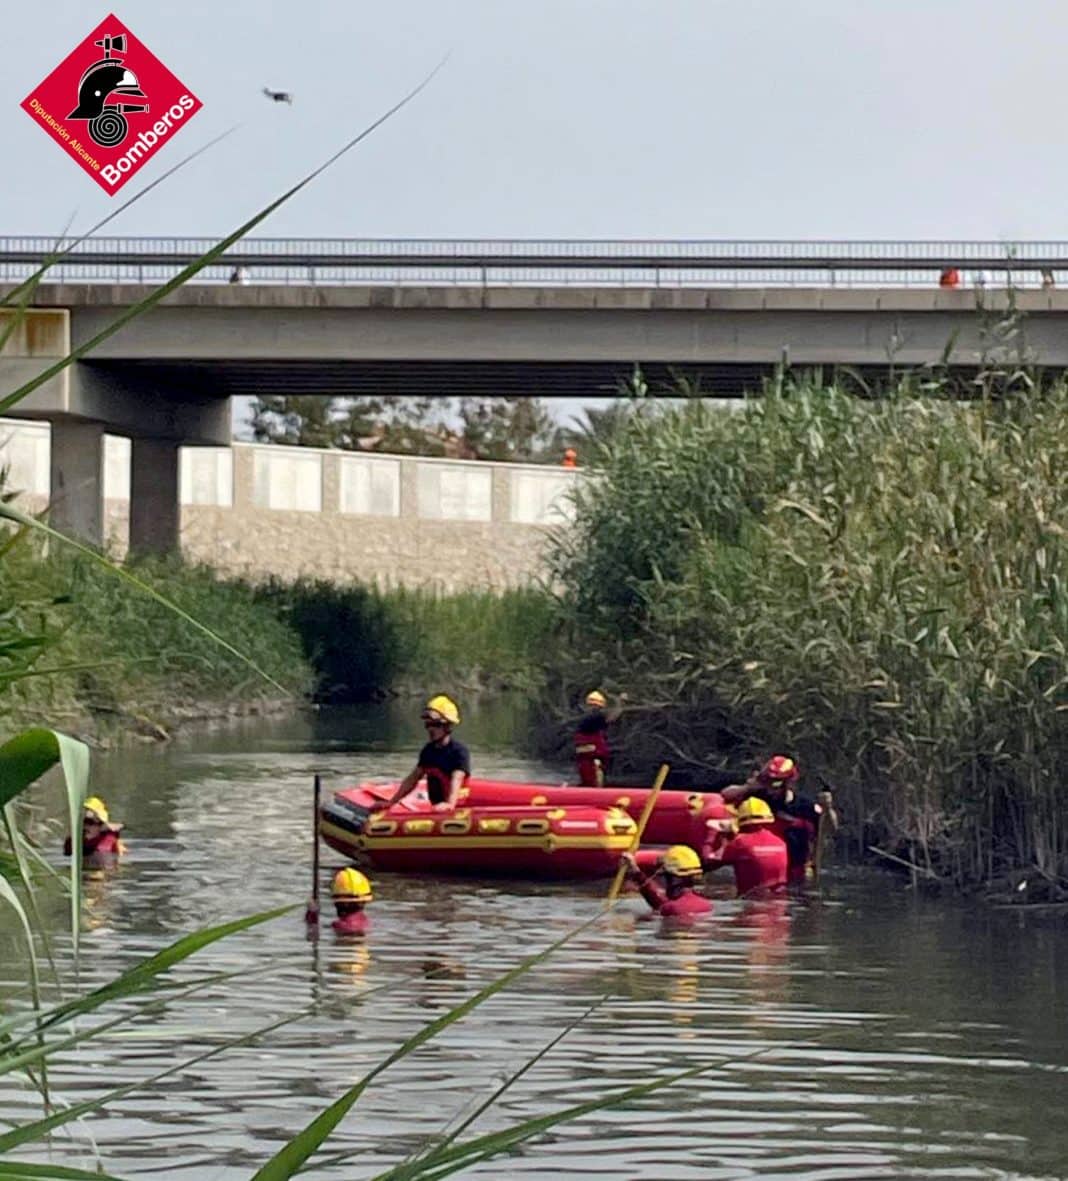 A 14-year-old boy drowns in the Segura River in Almoradí